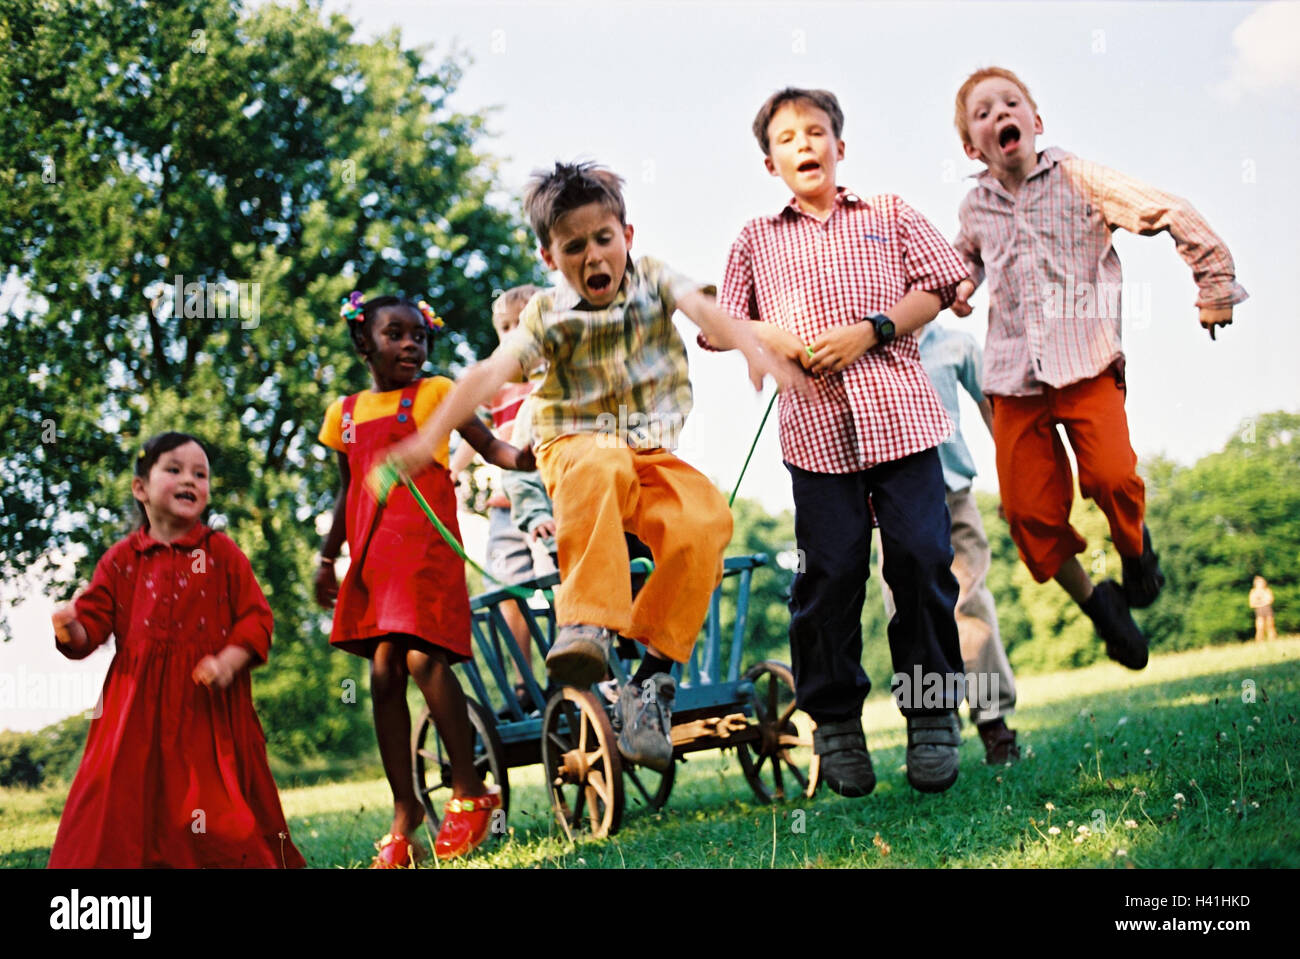 Children, group, skin colour differently, handcarts, game, fun, caper, summer, outside youth, childhood, friends, friendship, boy, girl, nationality, passed away, difference, leisure time, amusement, happy, melted, lighthearted, carriages, conductor carri Stock Photo